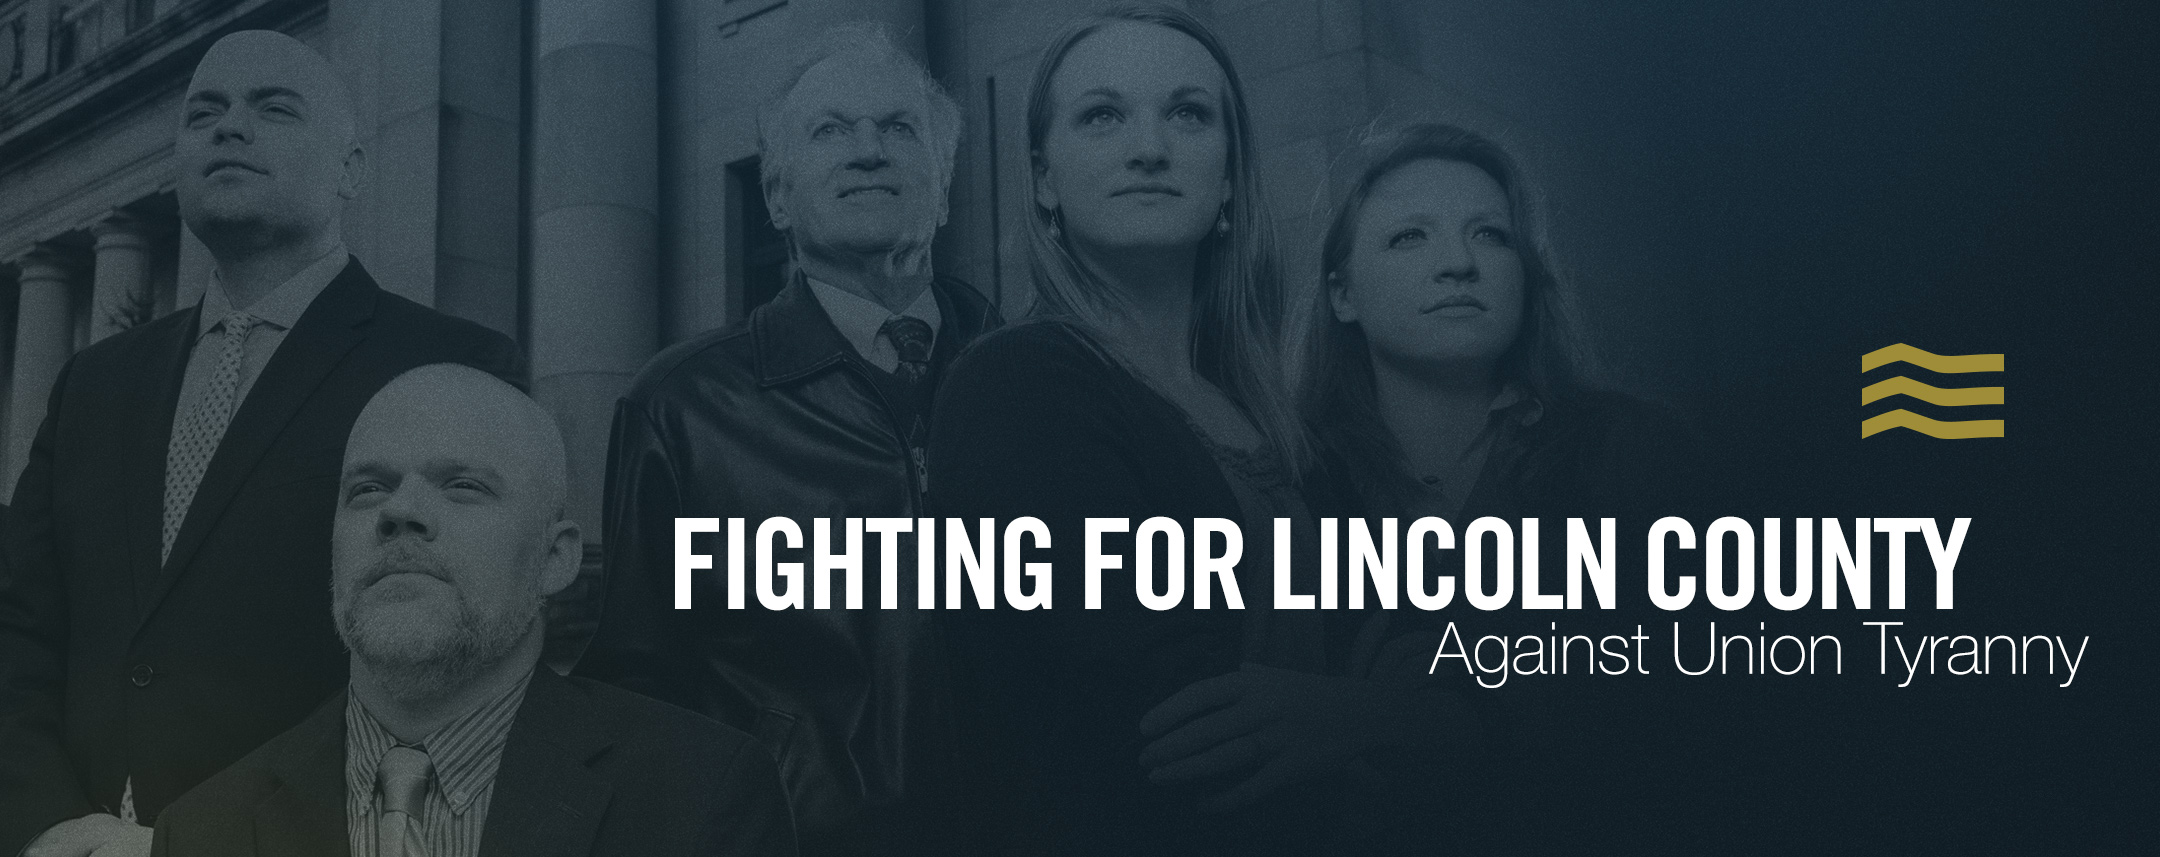 Lincoln-County-union-fight-FEATURED.jpg